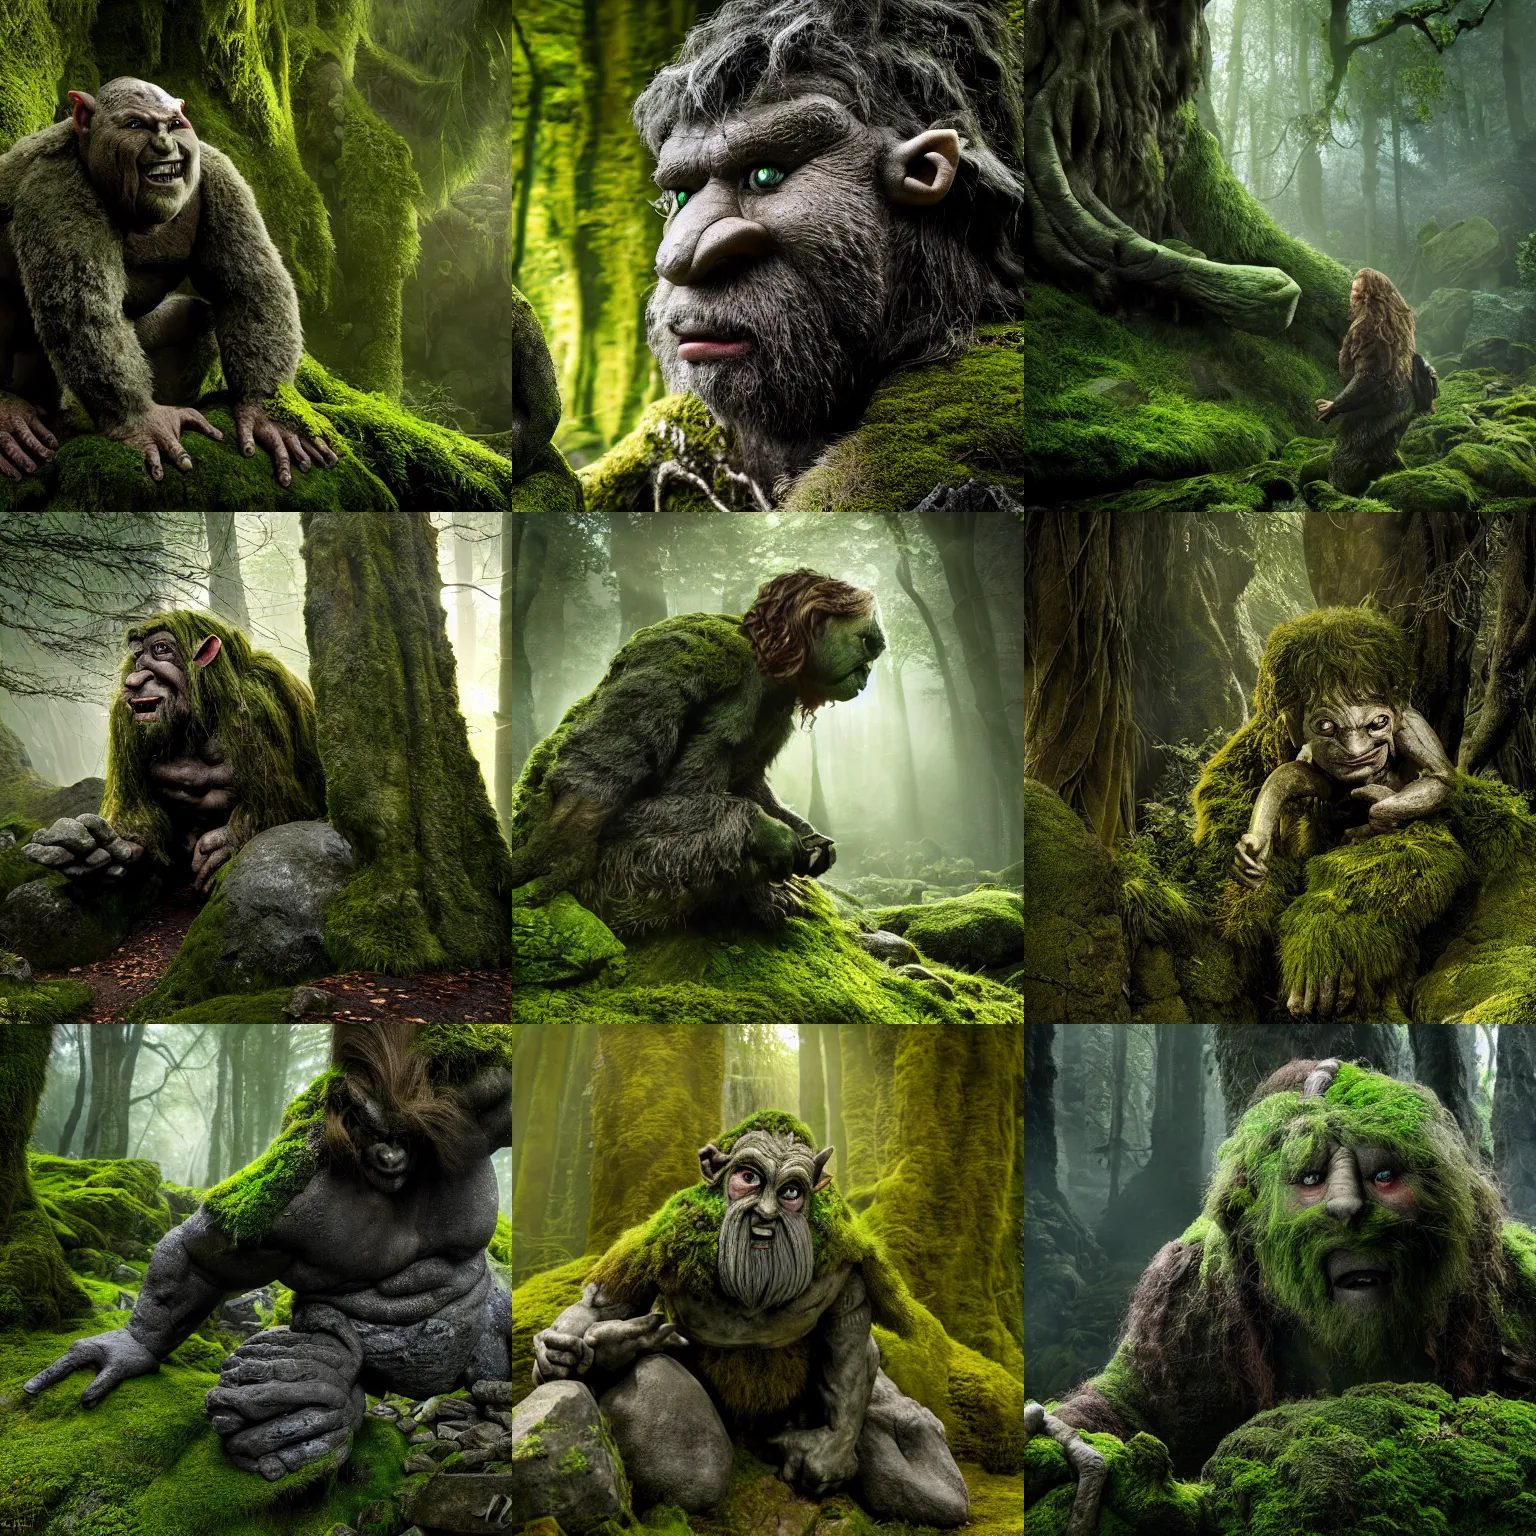 Prompt: 4 k photograph of a giant stone troll from the hobbit, dark forest background, sunlight filtering through the trees, moss and birds cover the troll.